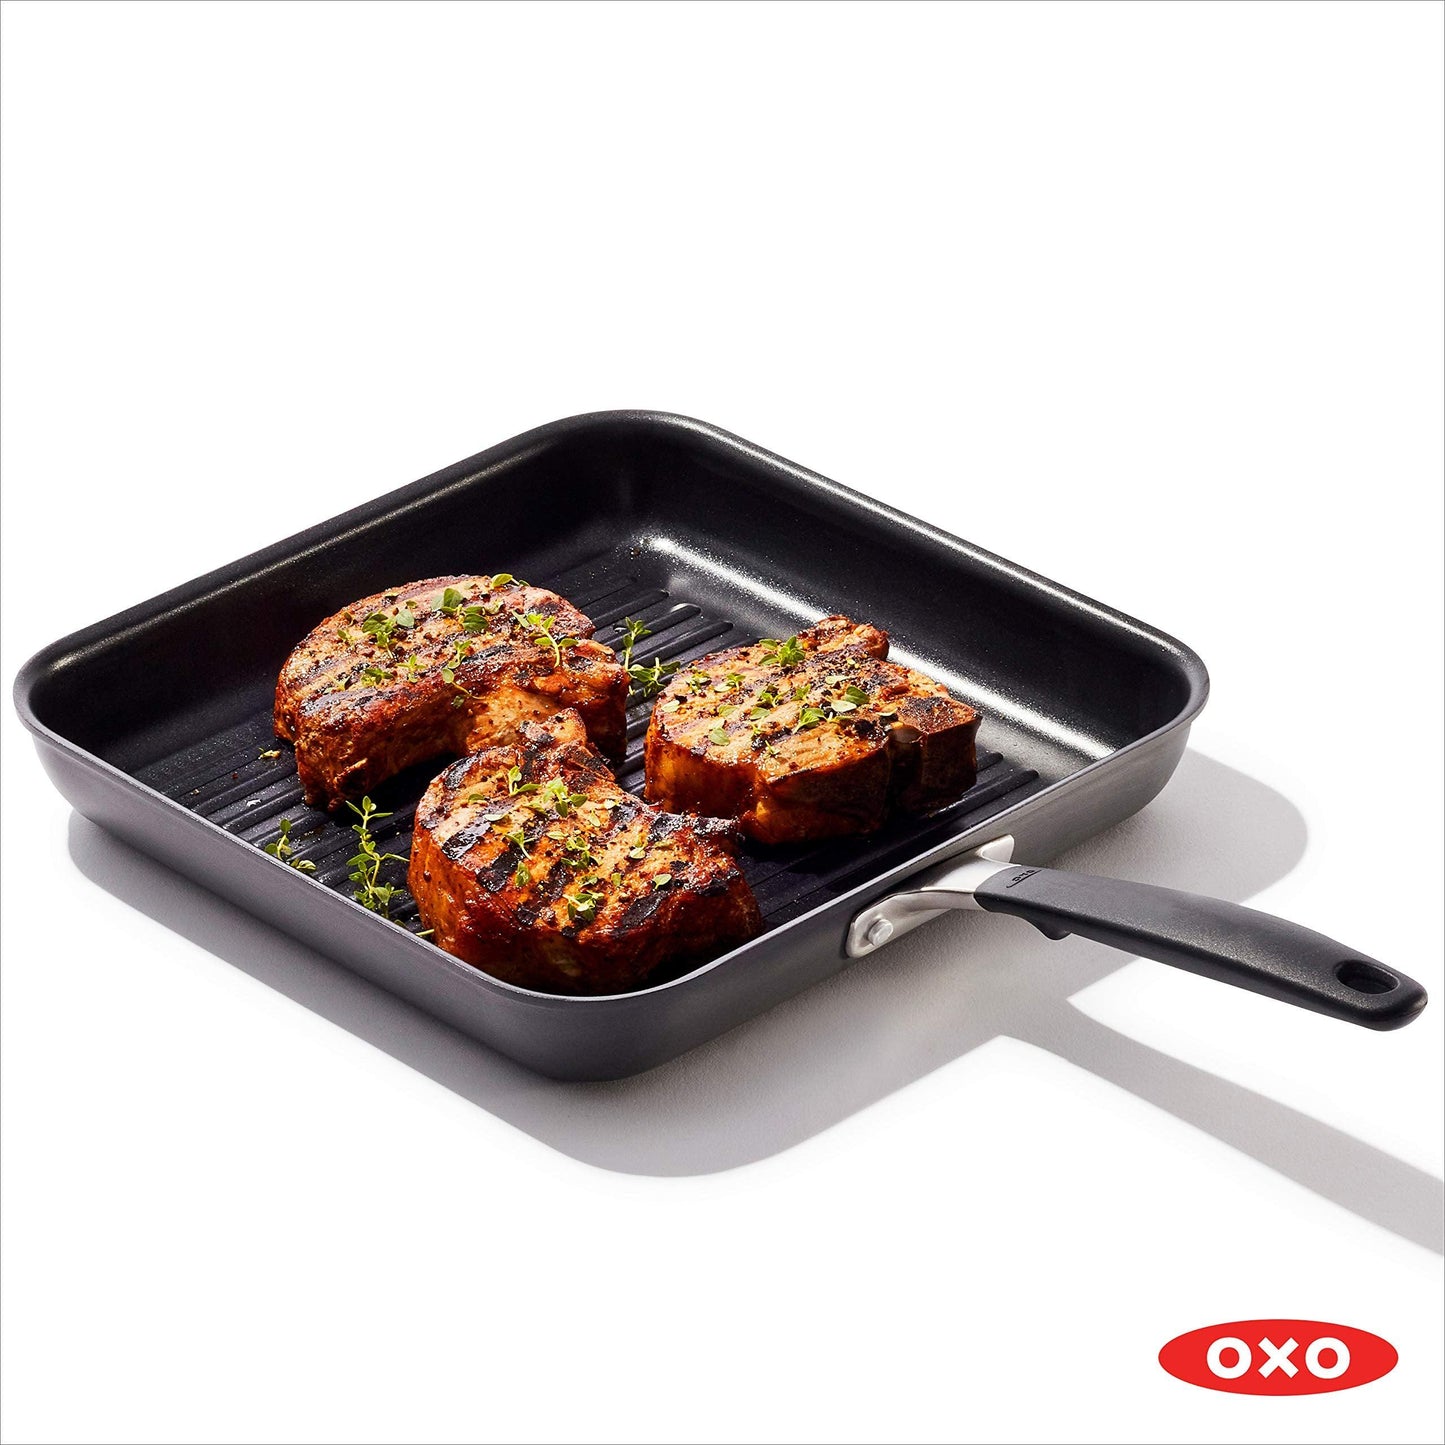 OXO Good Grips 11” Square Grill Pan, 3-Layered German Engineered Nonstick Coating, Stainless Steel Handle with Nonslip Silicone, Black - CookCave